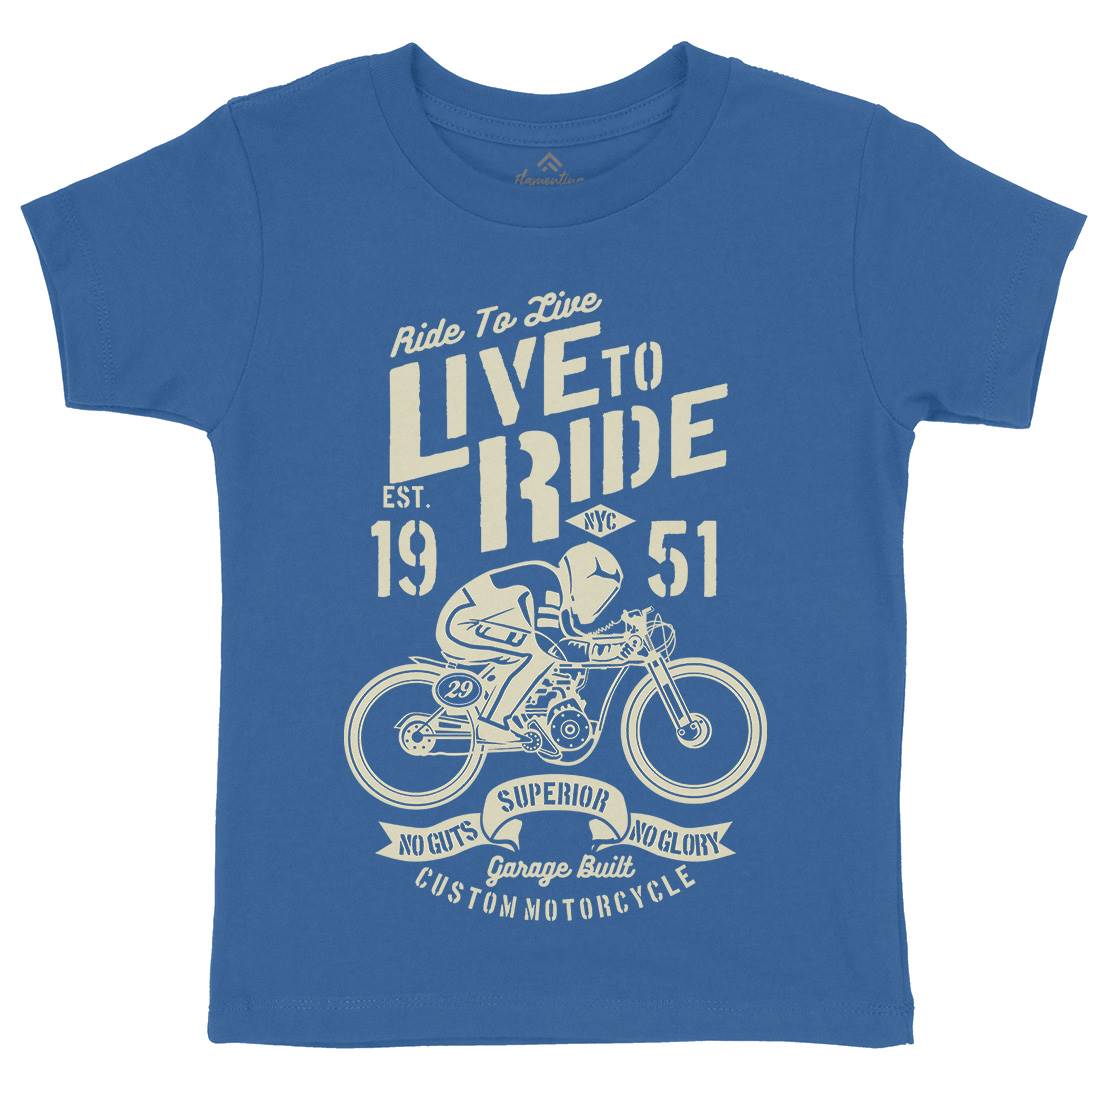 Live To Ride Kids Crew Neck T-Shirt Motorcycles B227